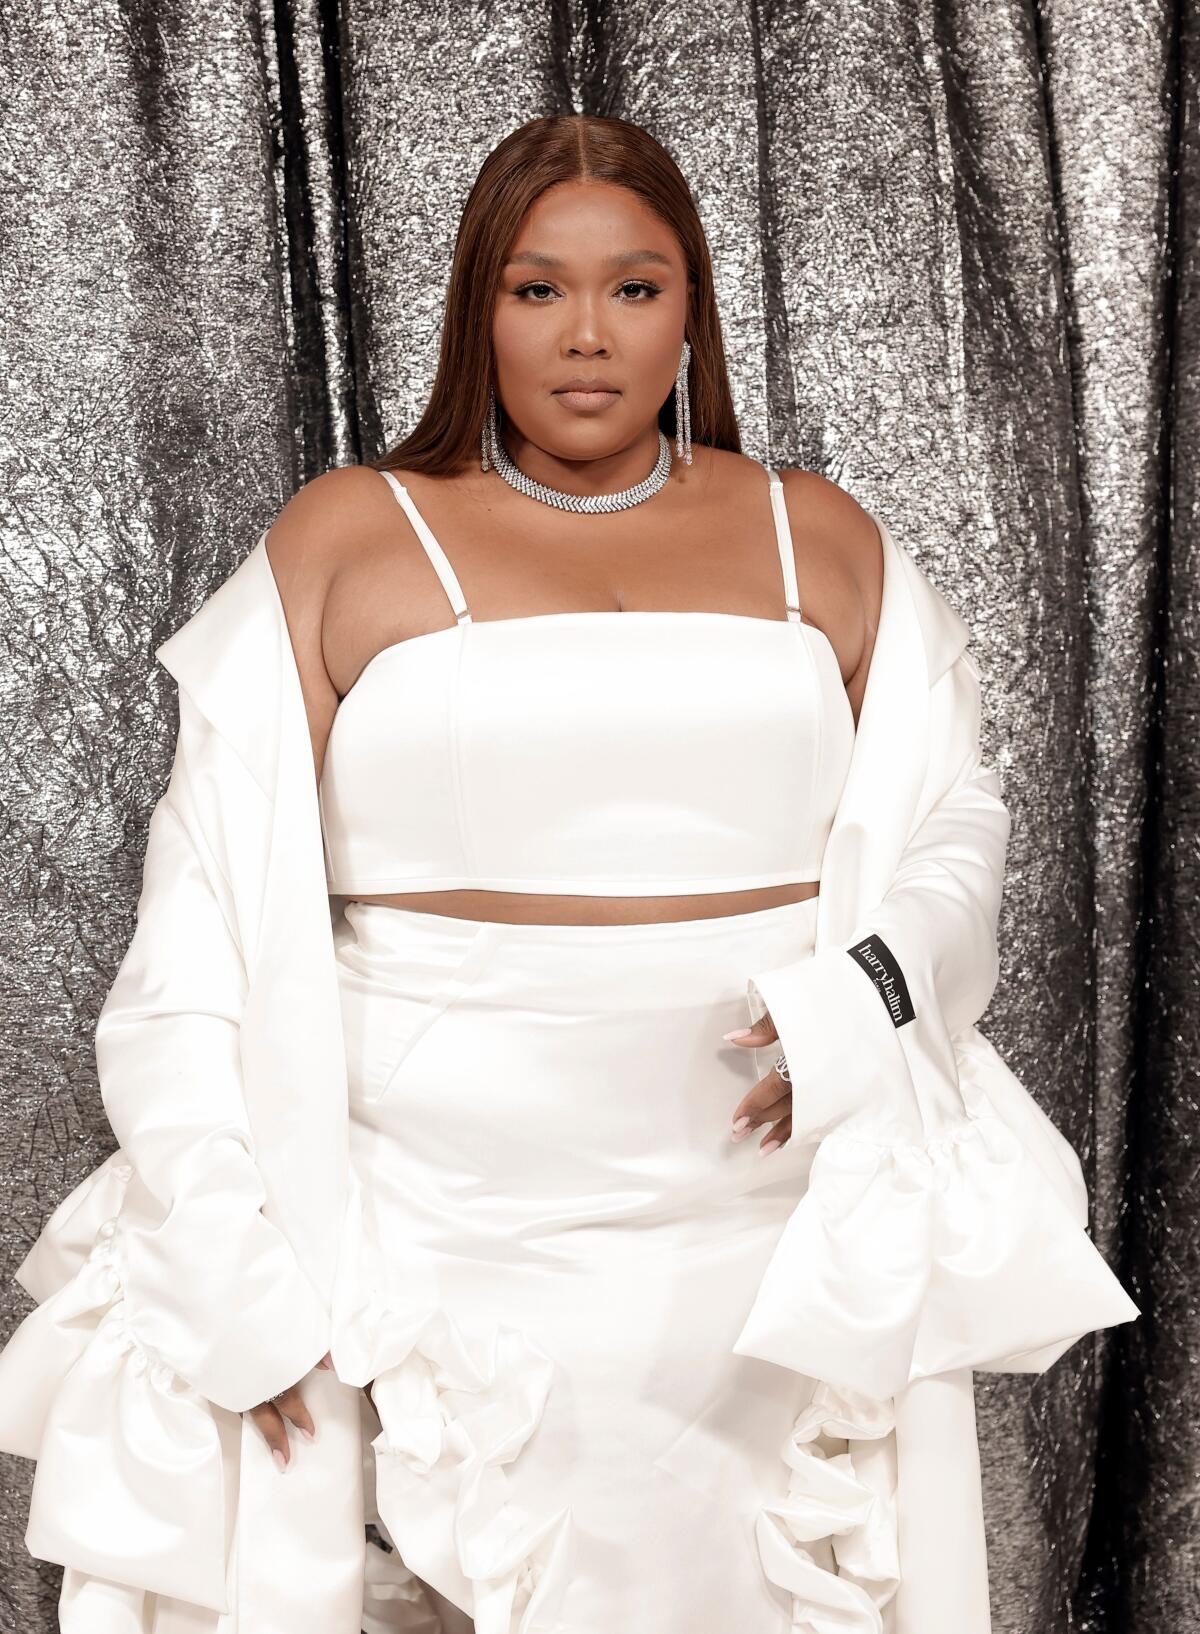 Lizzo in a white dress on the red carpet